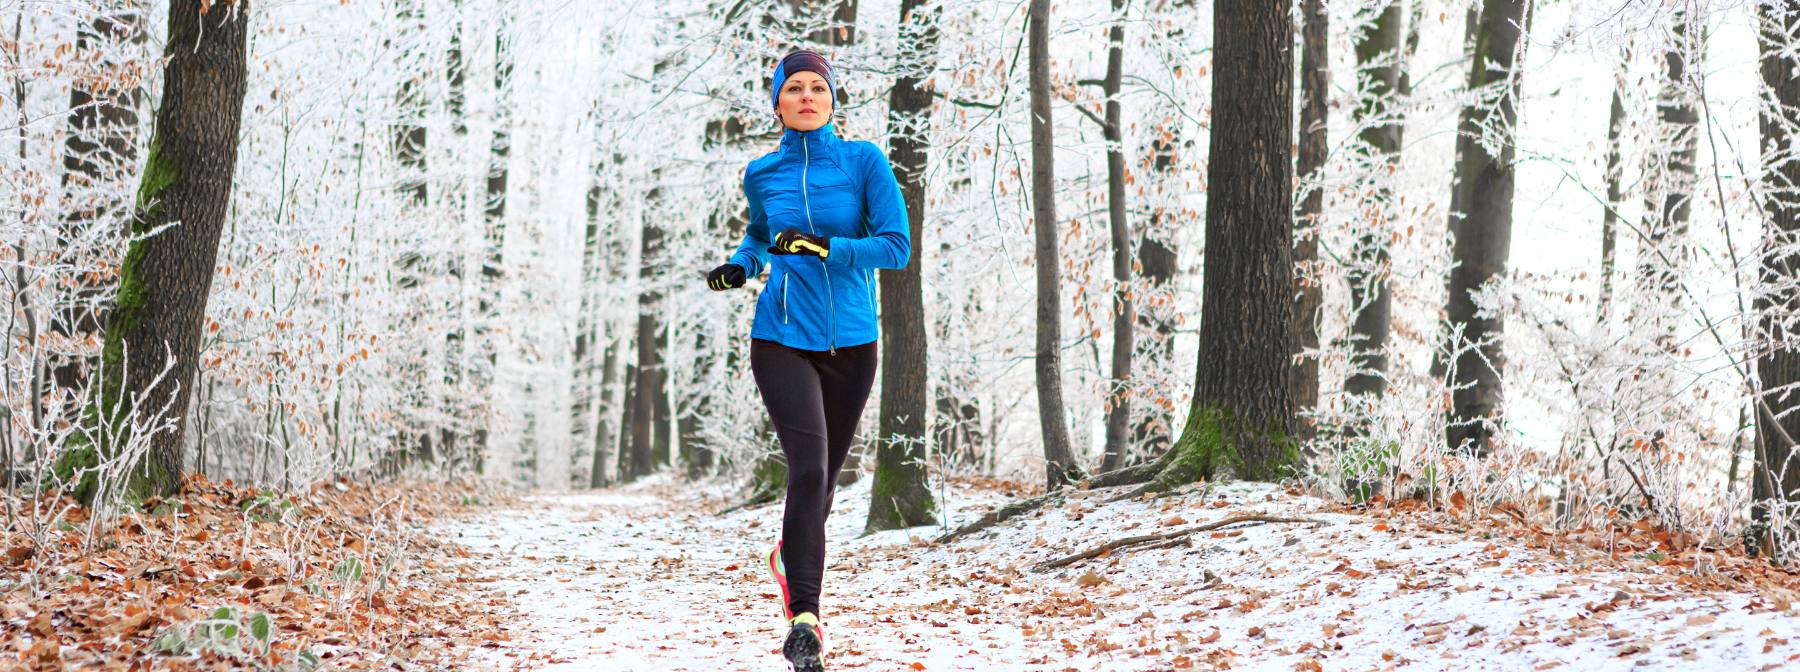 How to Work Out Safely in The Cold This Winter